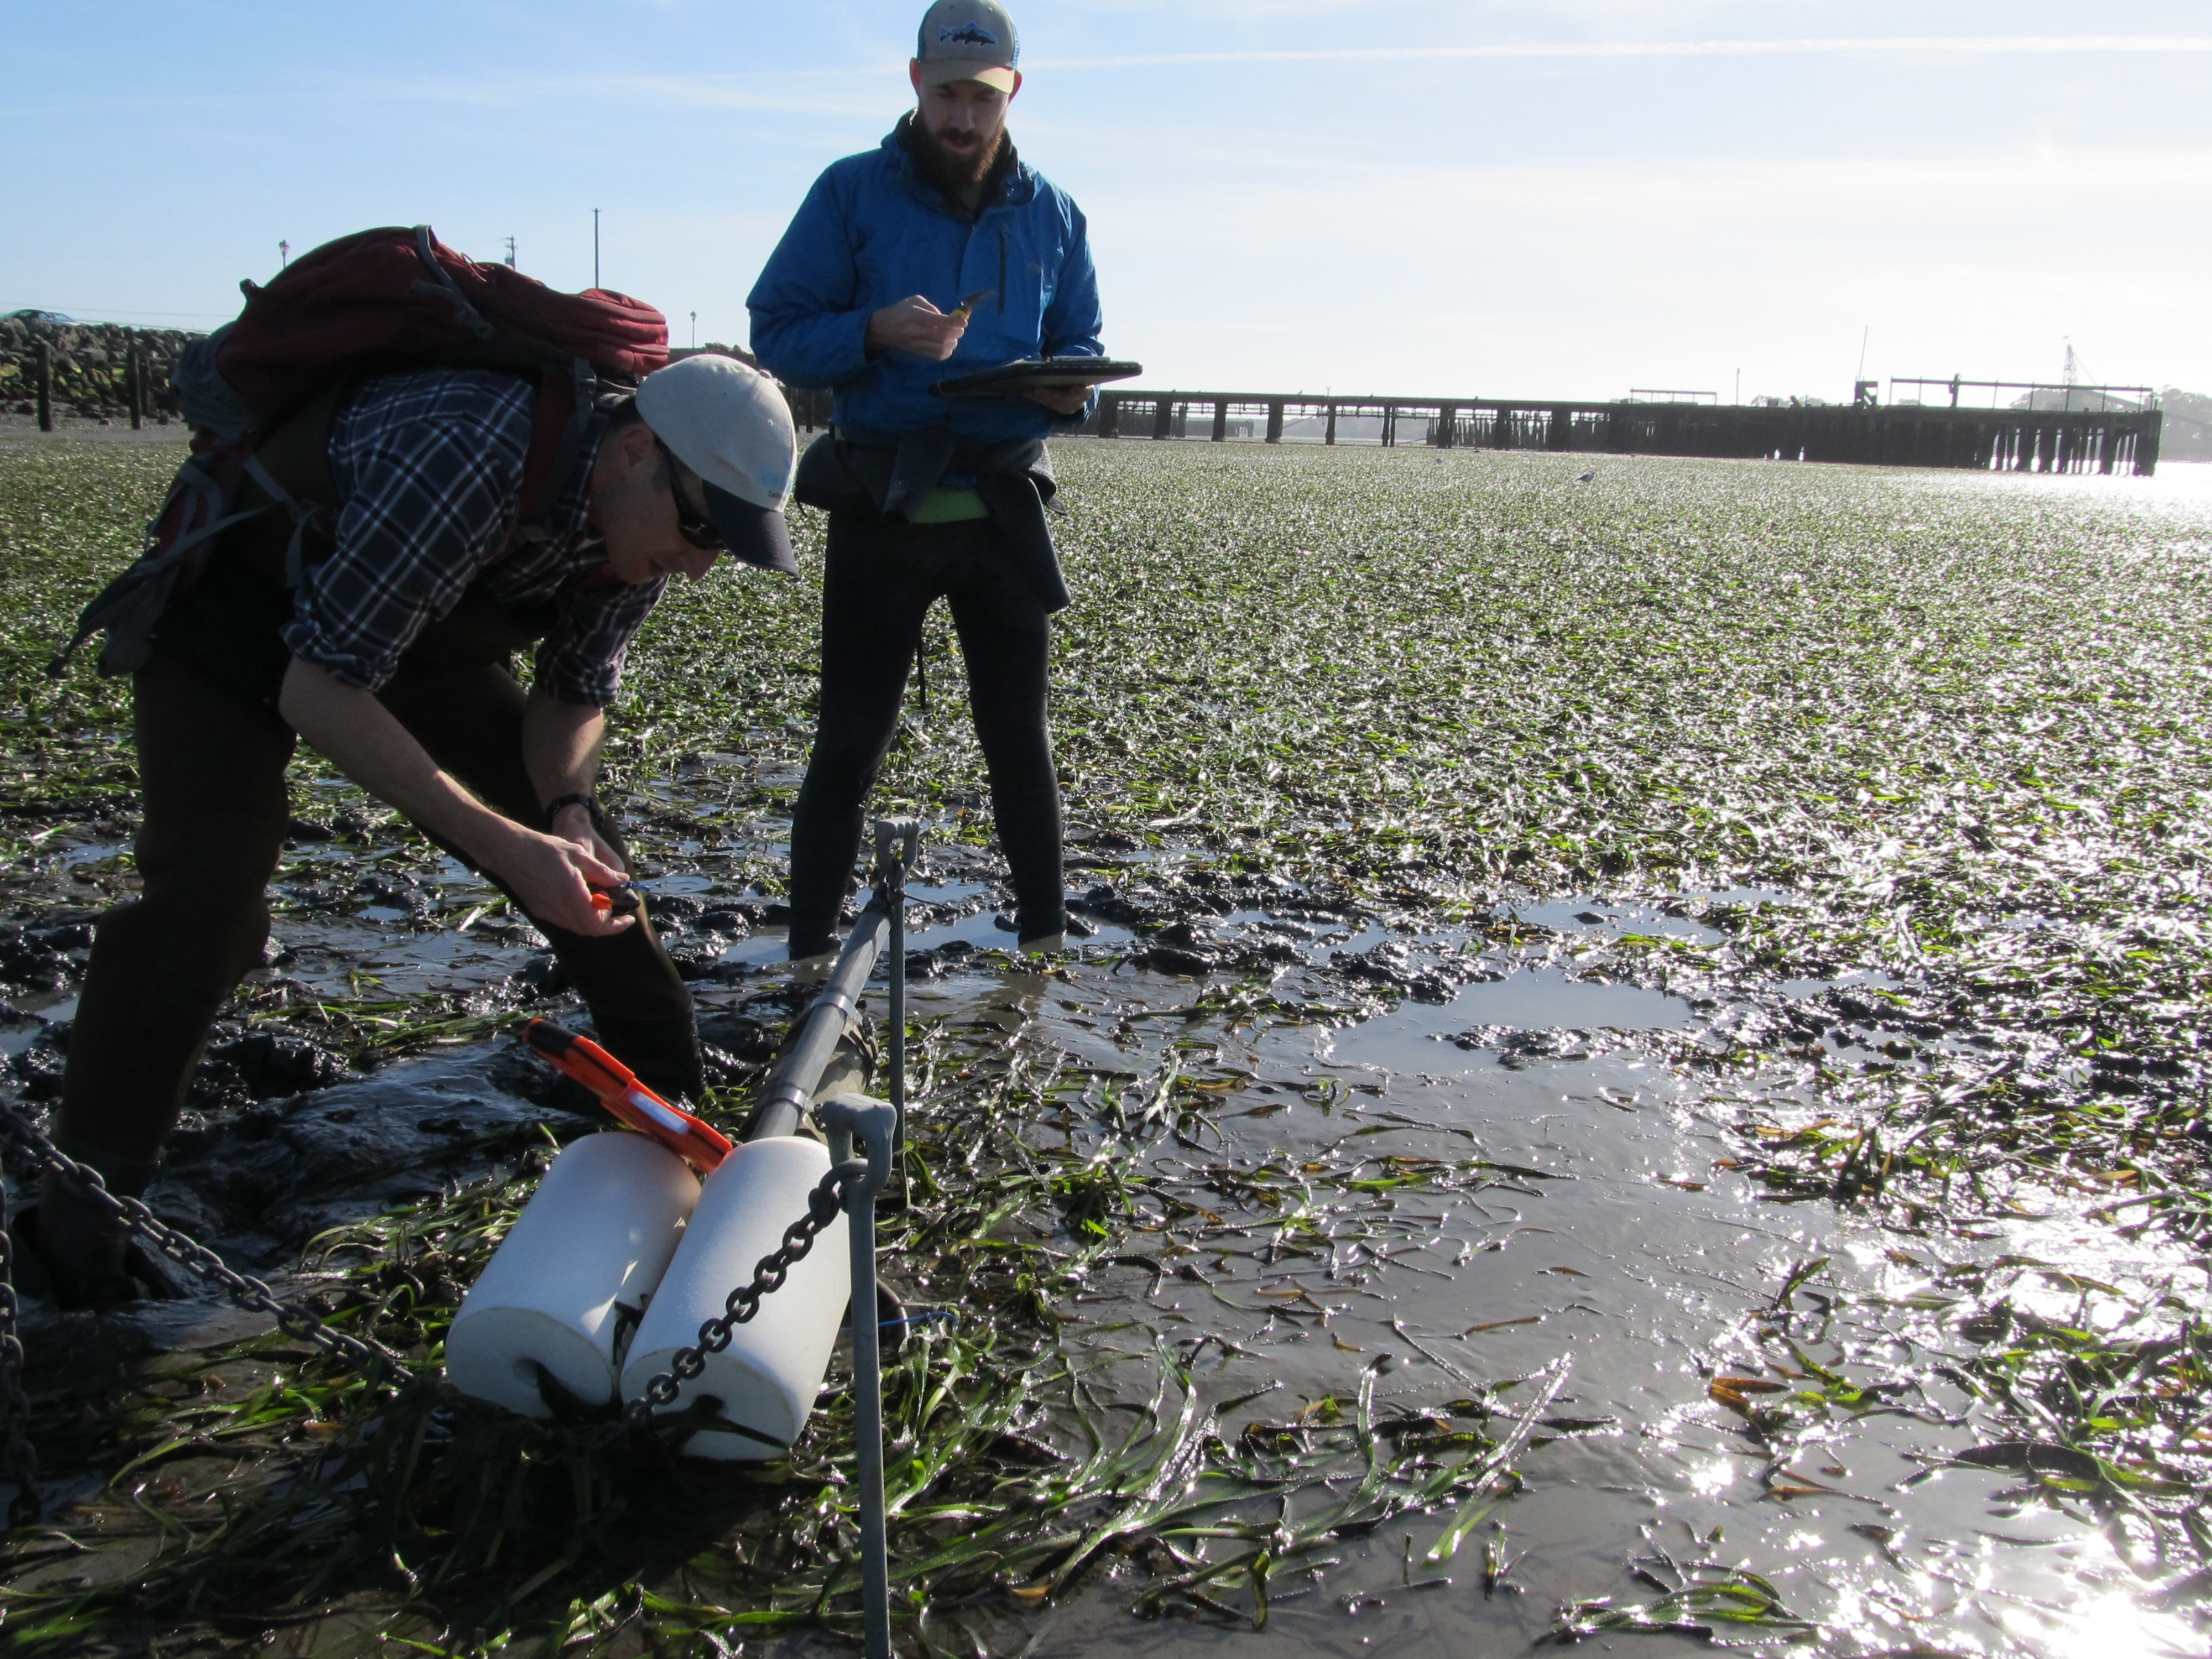 Deployment of alternate oceanographic instruments to monitor pH in Humboldt Bay. Photo credit: Eric LeBlanc